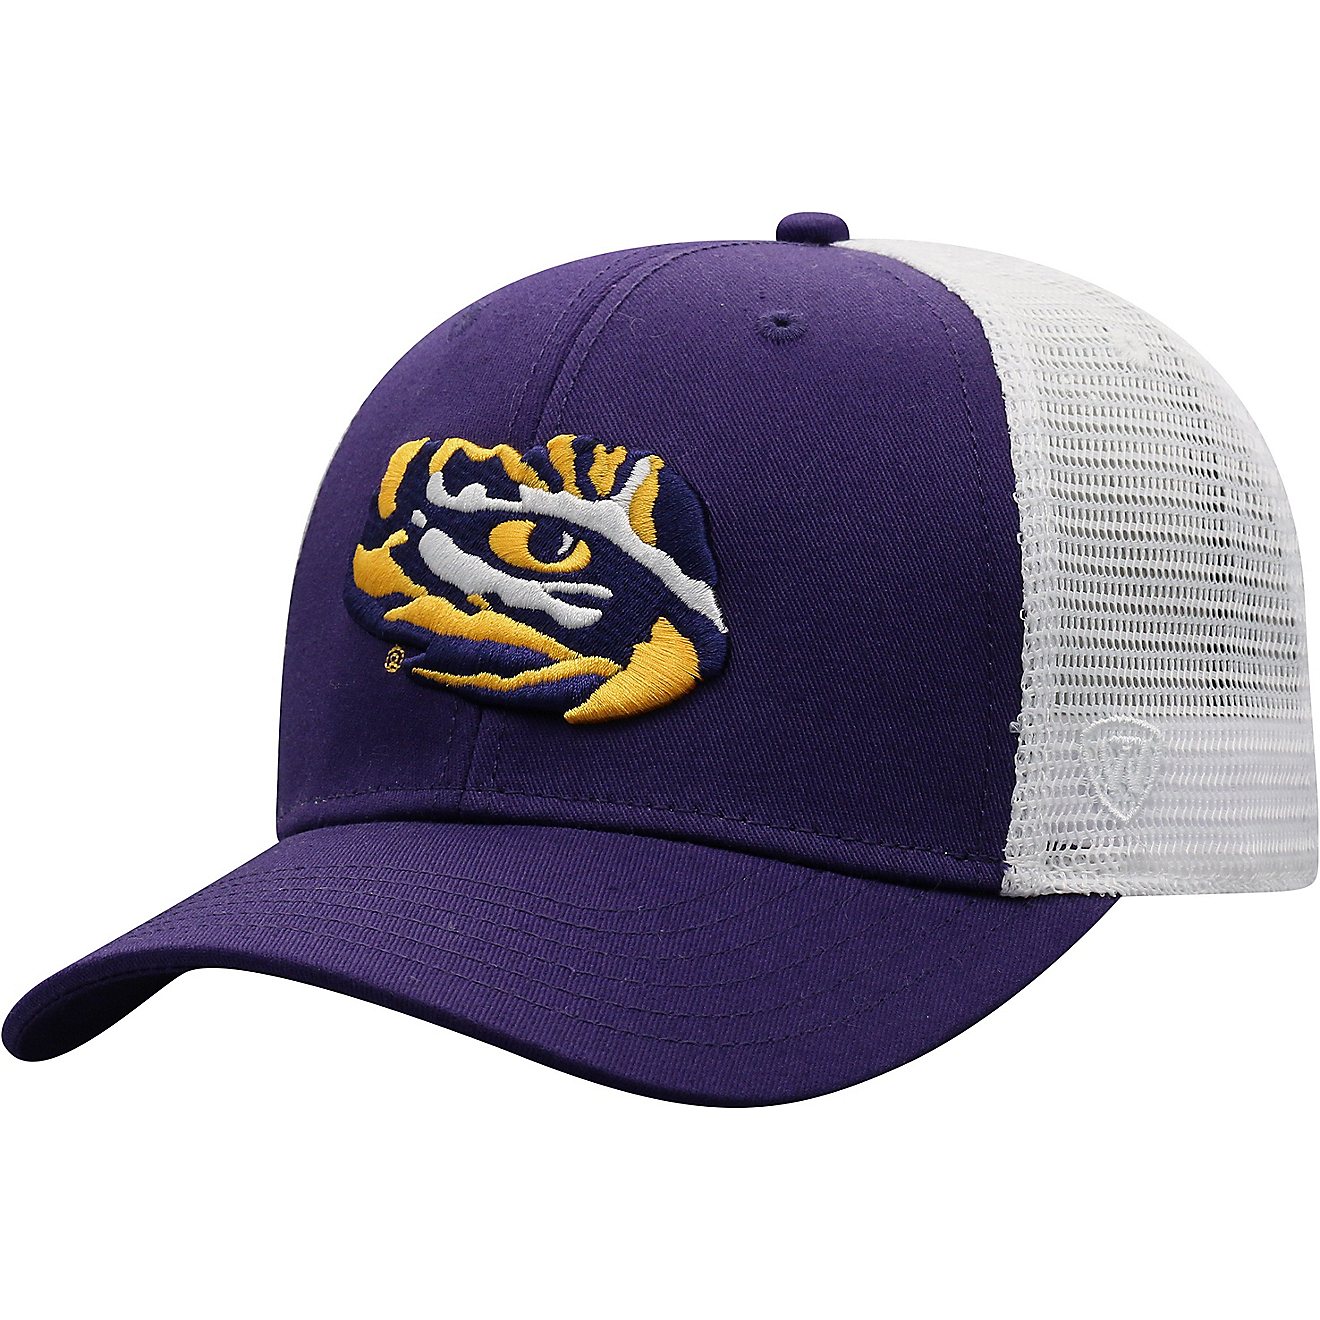 Top of the World Men's Louisiana State University BB Adjustable 2-Tone Cap                                                       - view number 1